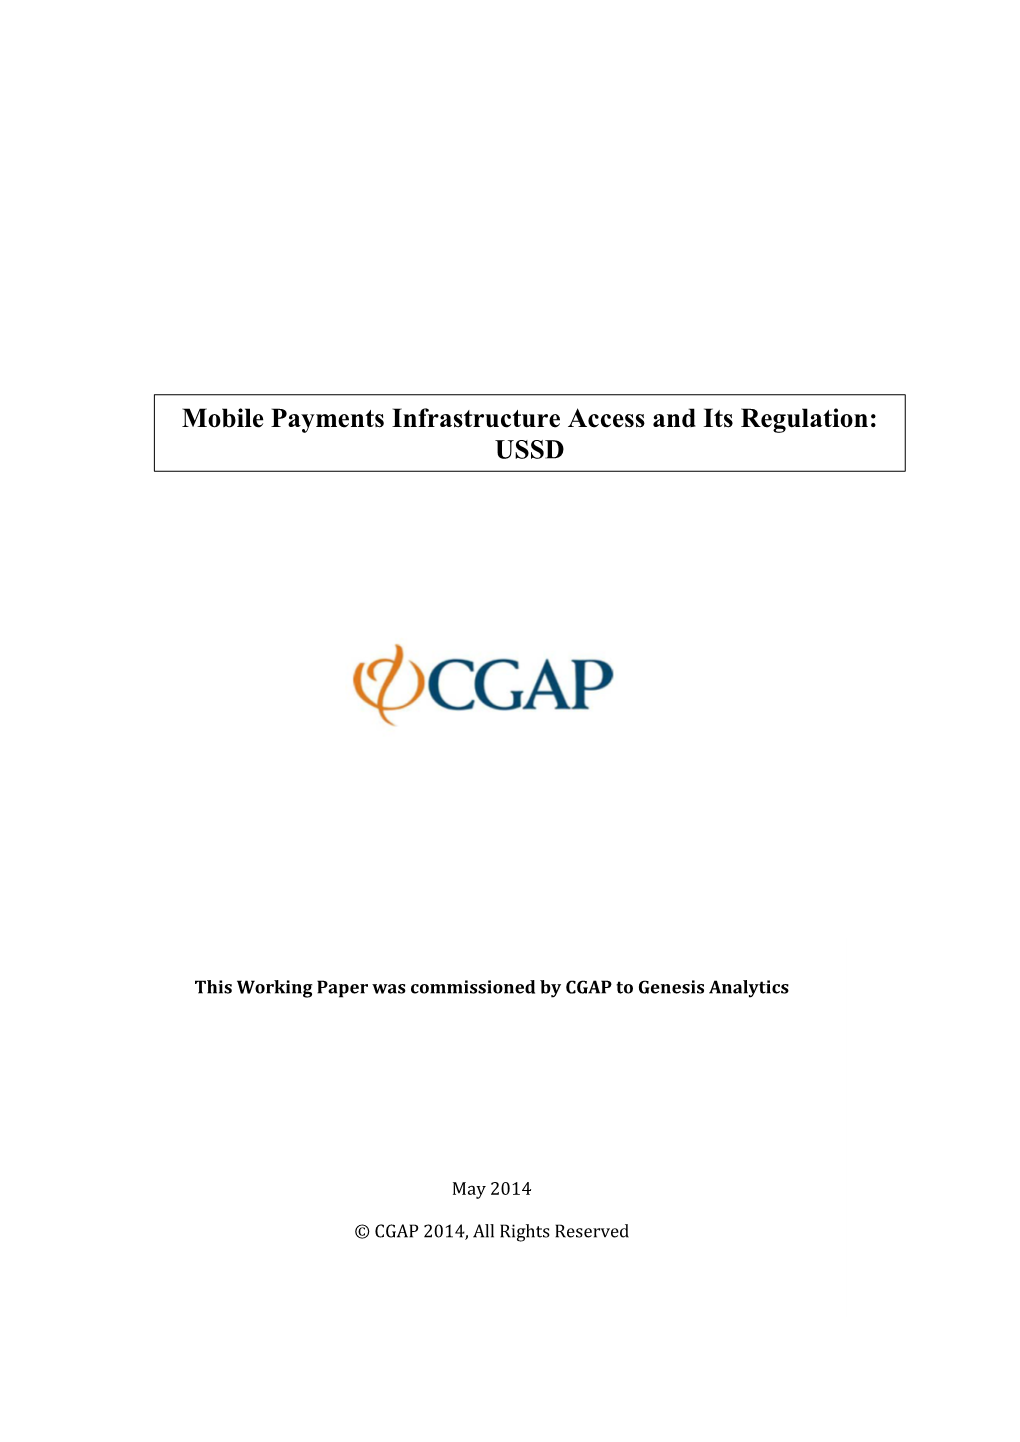 Mobile Payments Infrastructure Access and Its Regulation: USSD